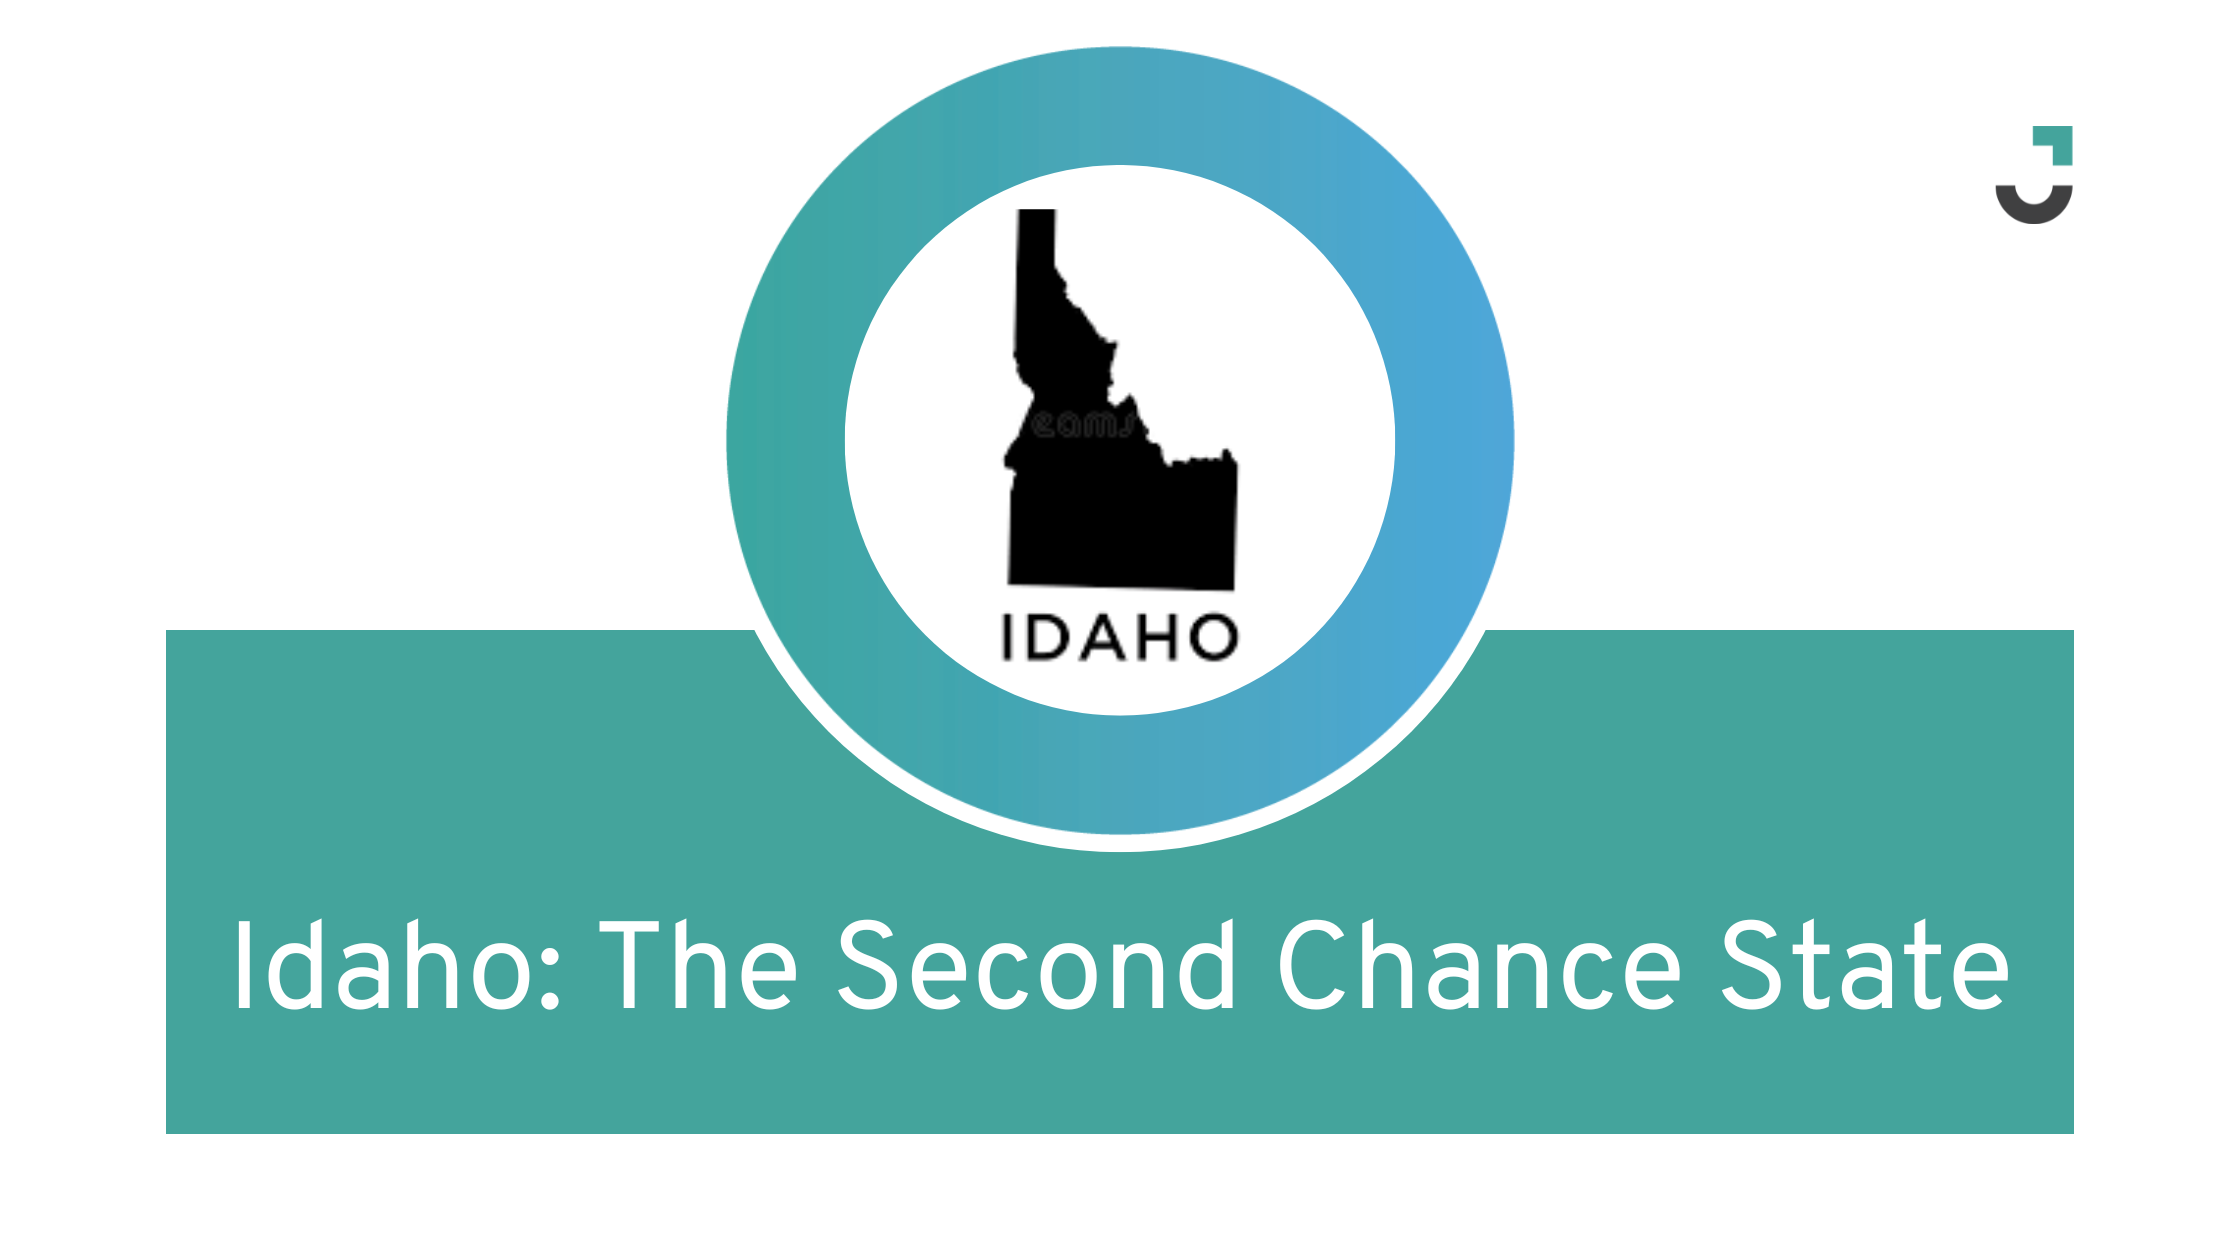 Idaho: The Second Chance State